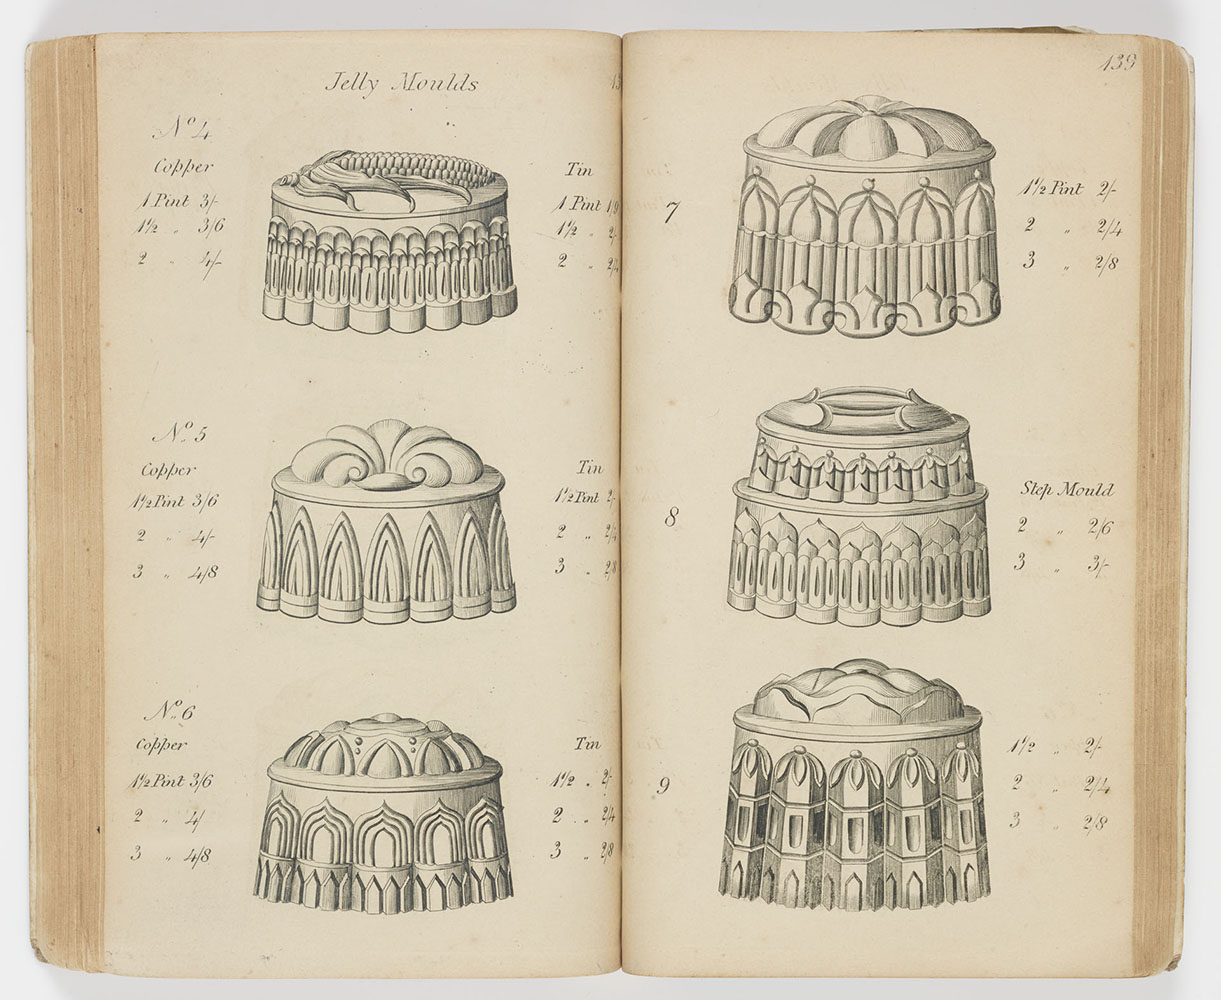 Jelly moulds from catalogue